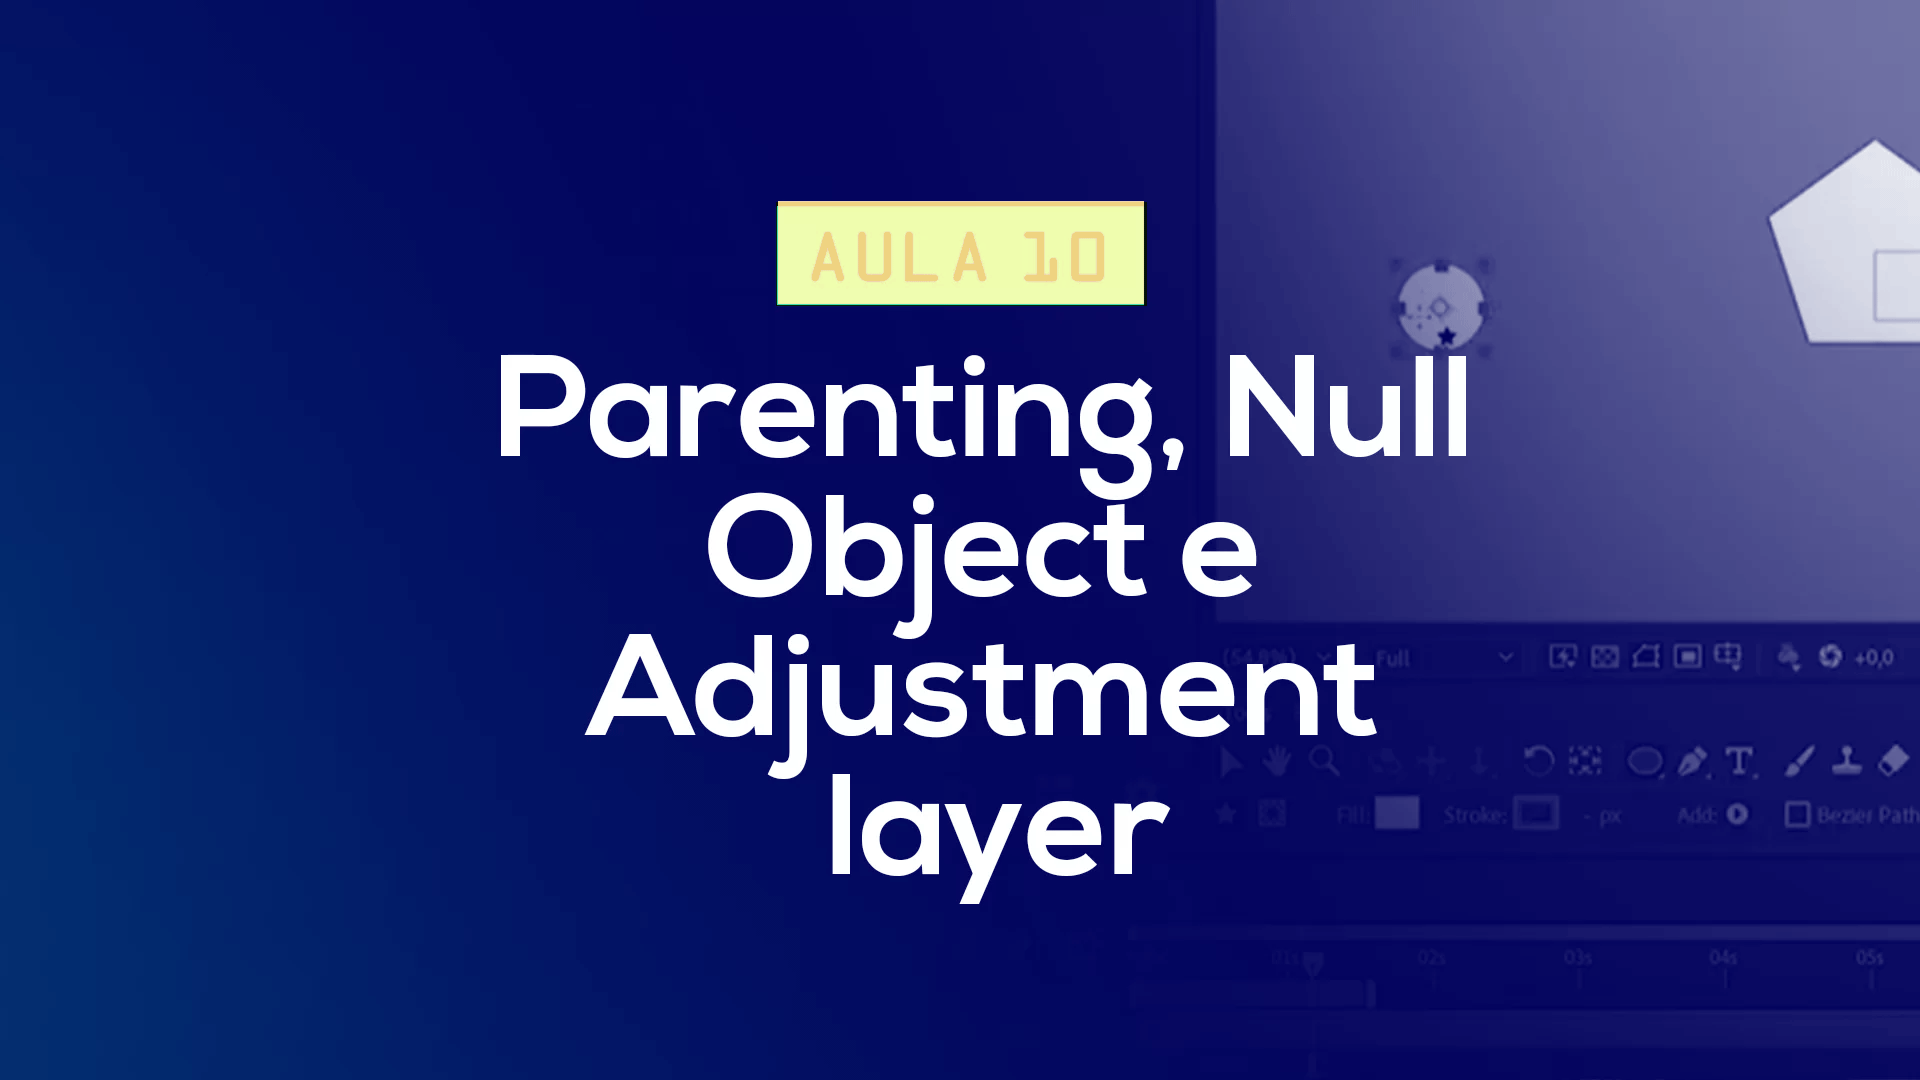 Parenting, Null Object e Adjustment Layer